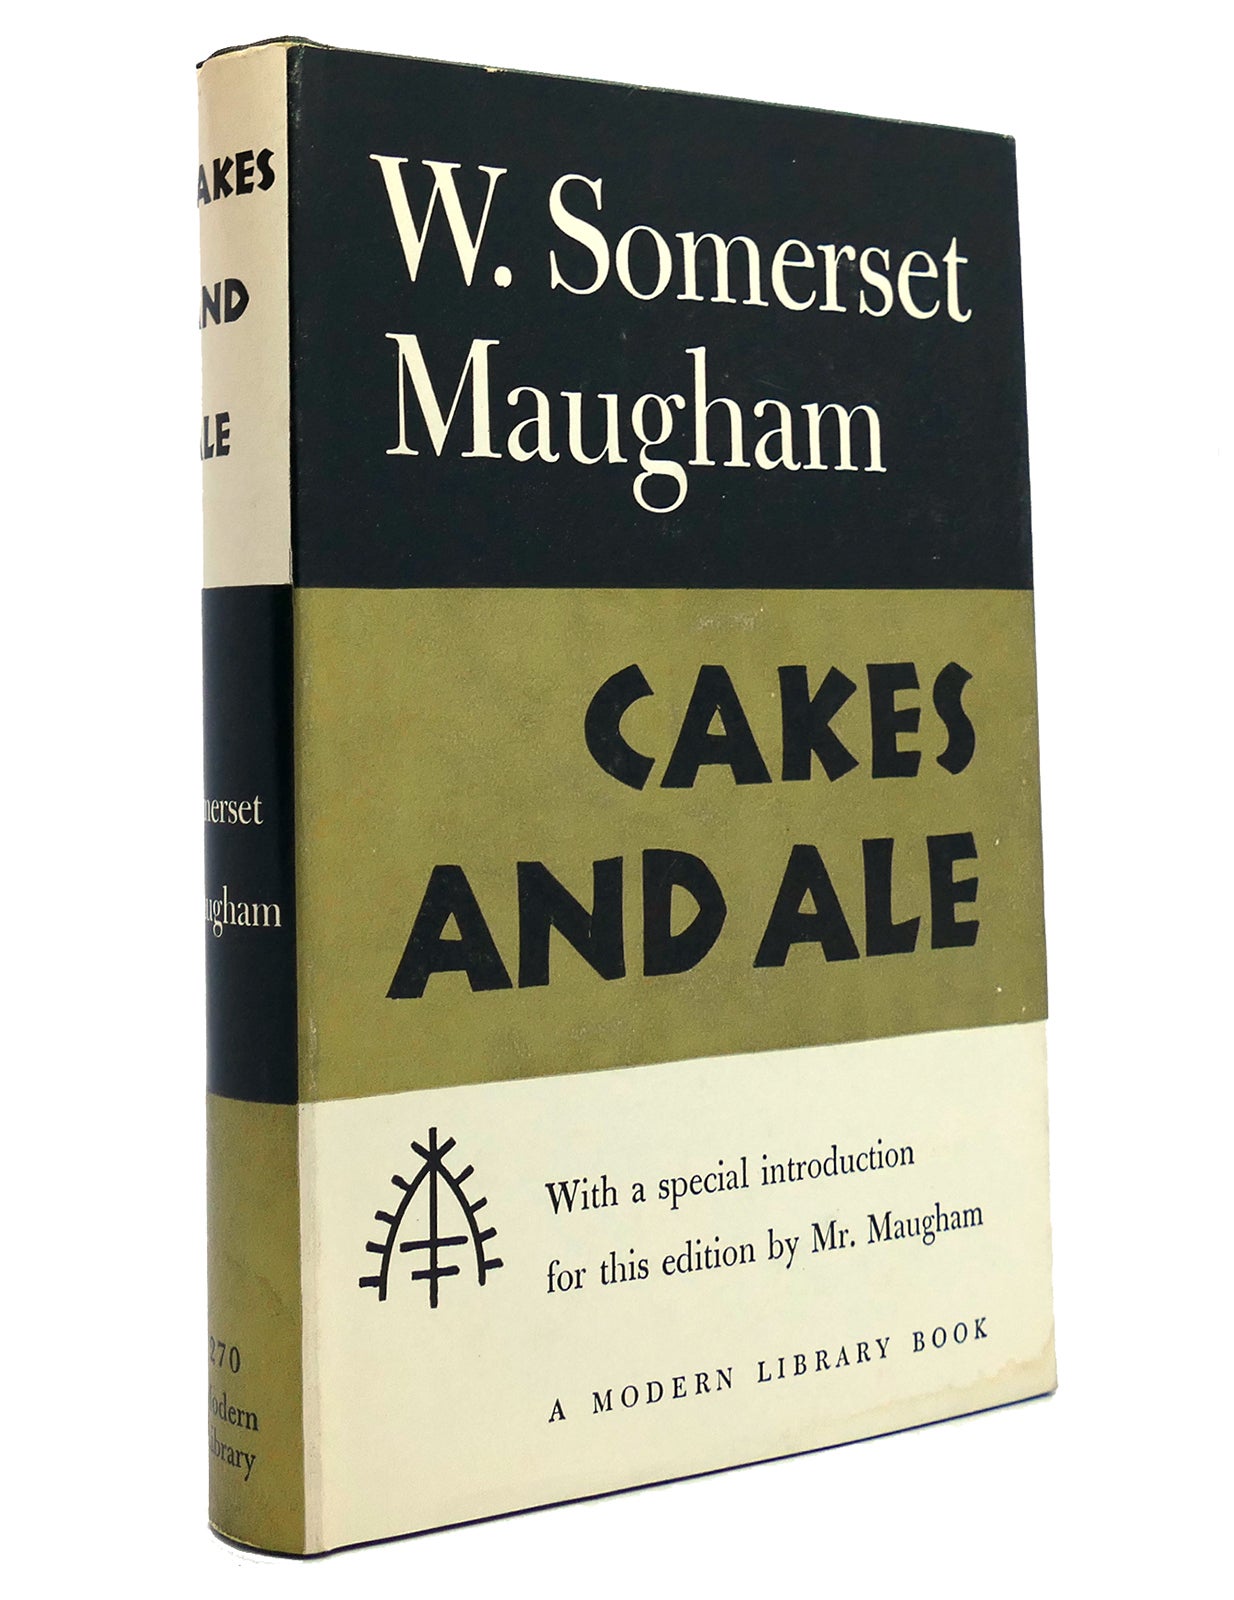 Cakes and Ale by W. Somerset Maugham – BOOKS AND LOST STORIES